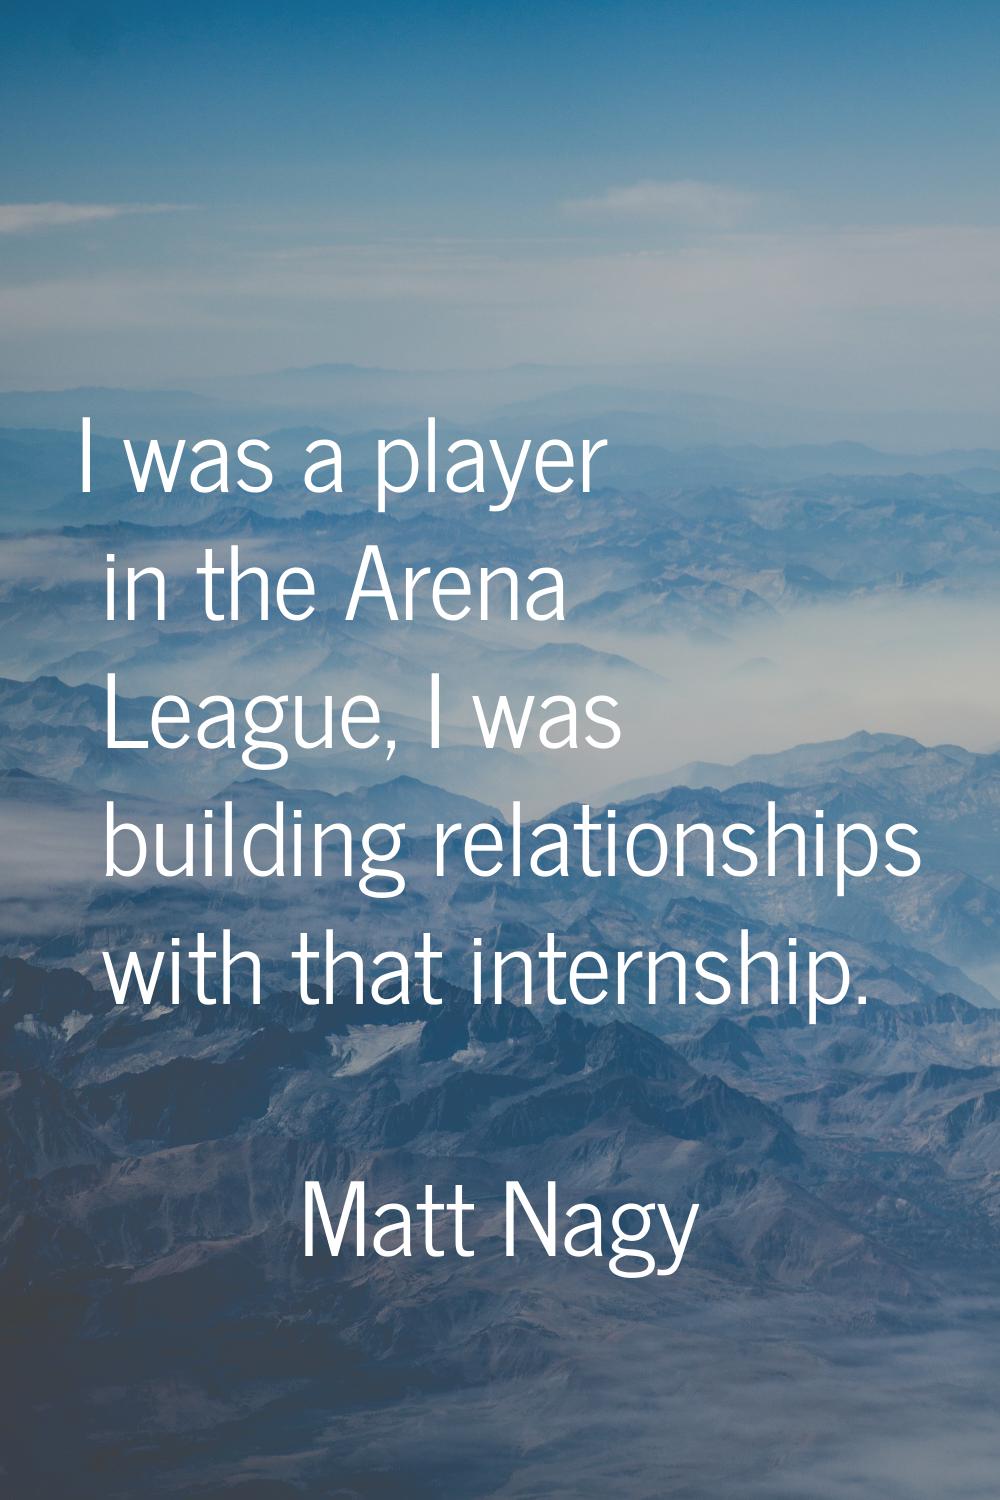 I was a player in the Arena League, I was building relationships with that internship.